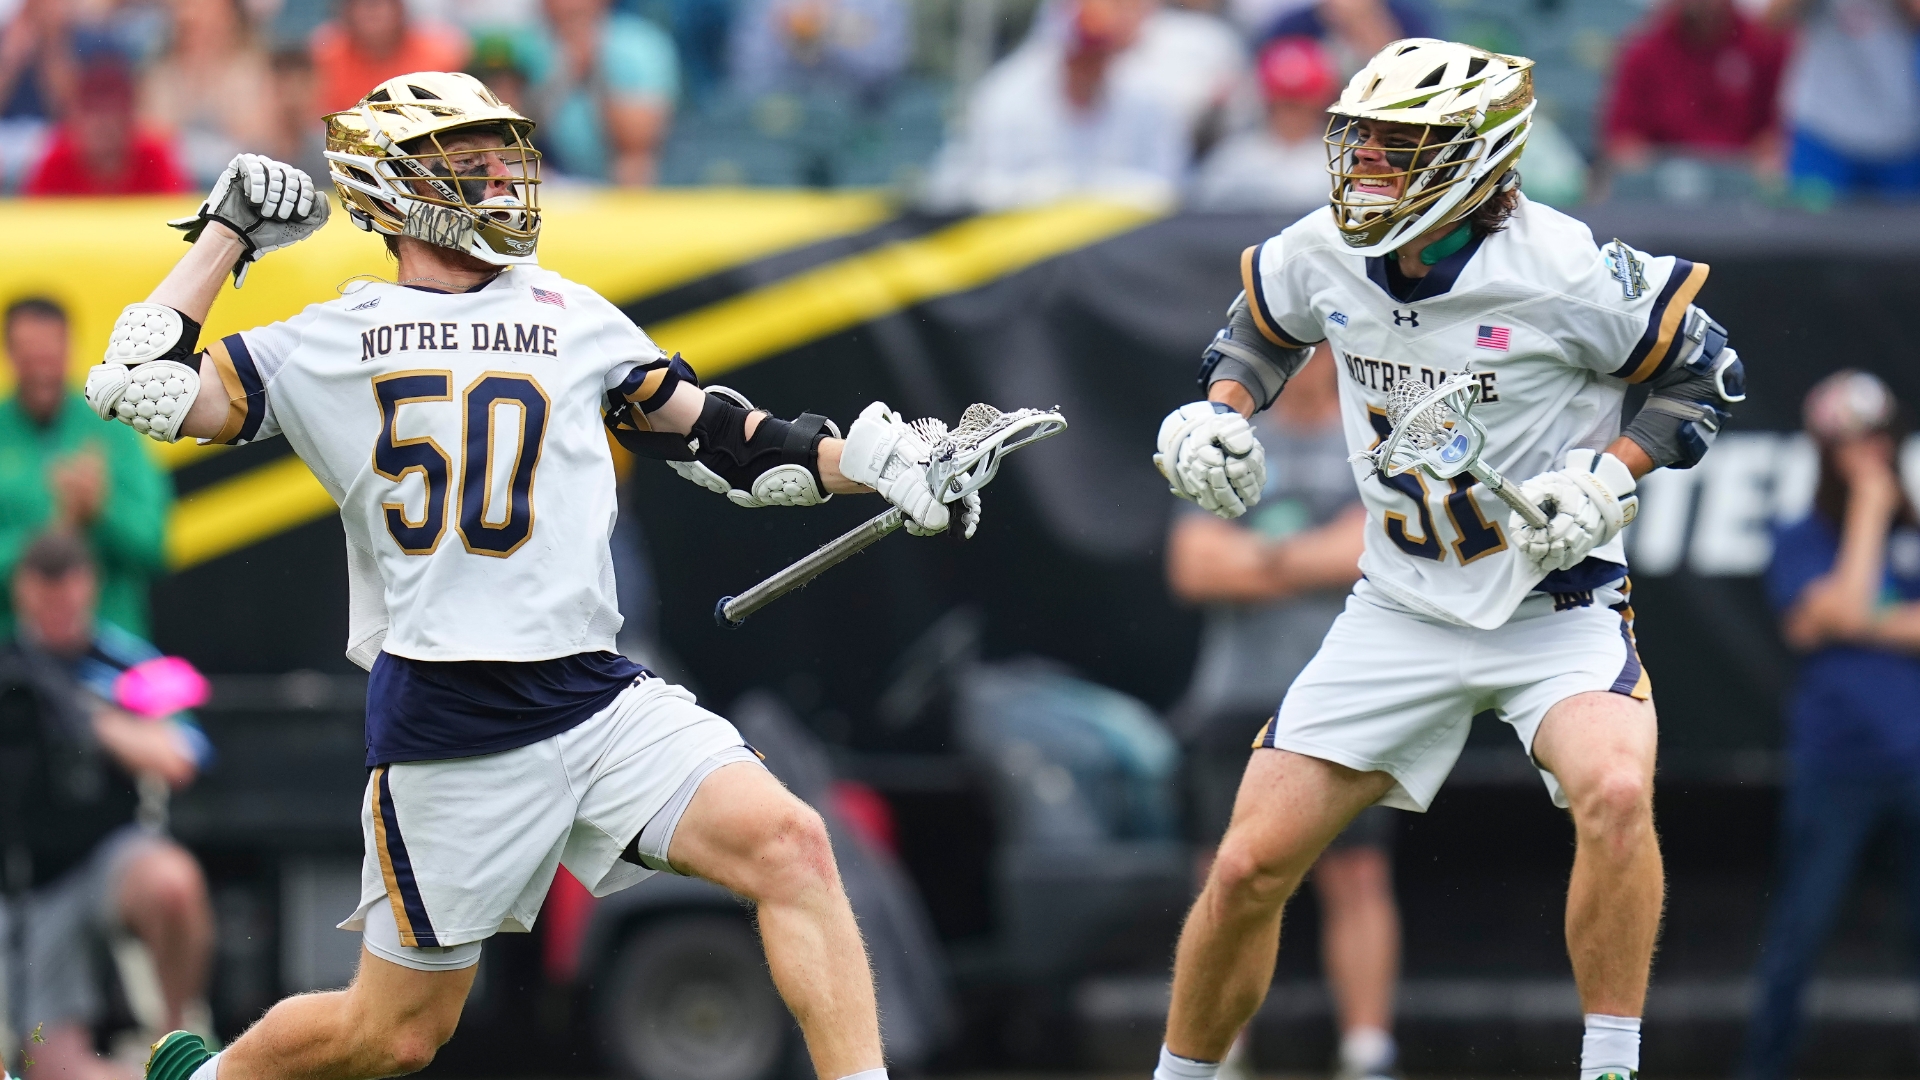 Kavanagh brothers help lead Notre Dame to back-to-back titles